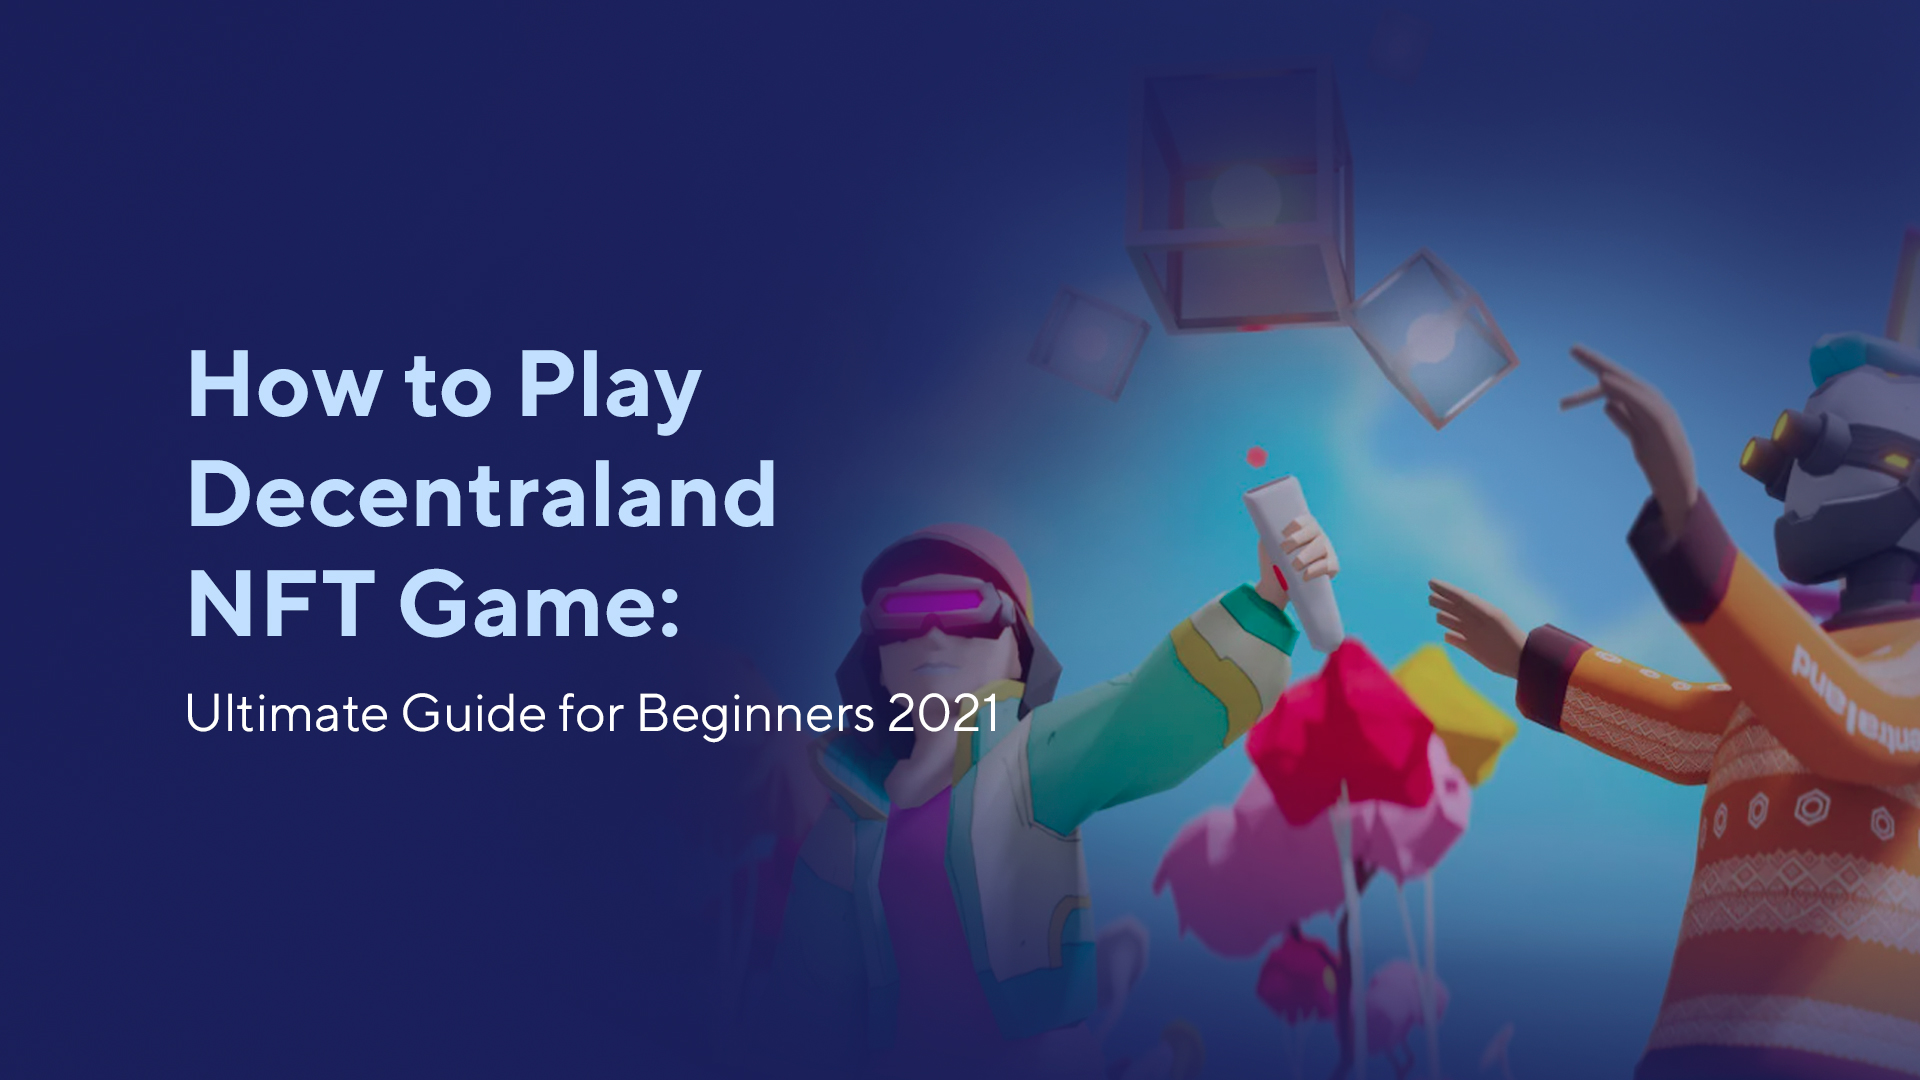 How to Play Decentraland NFT Game: Ultimate Guide for Beginners 2021